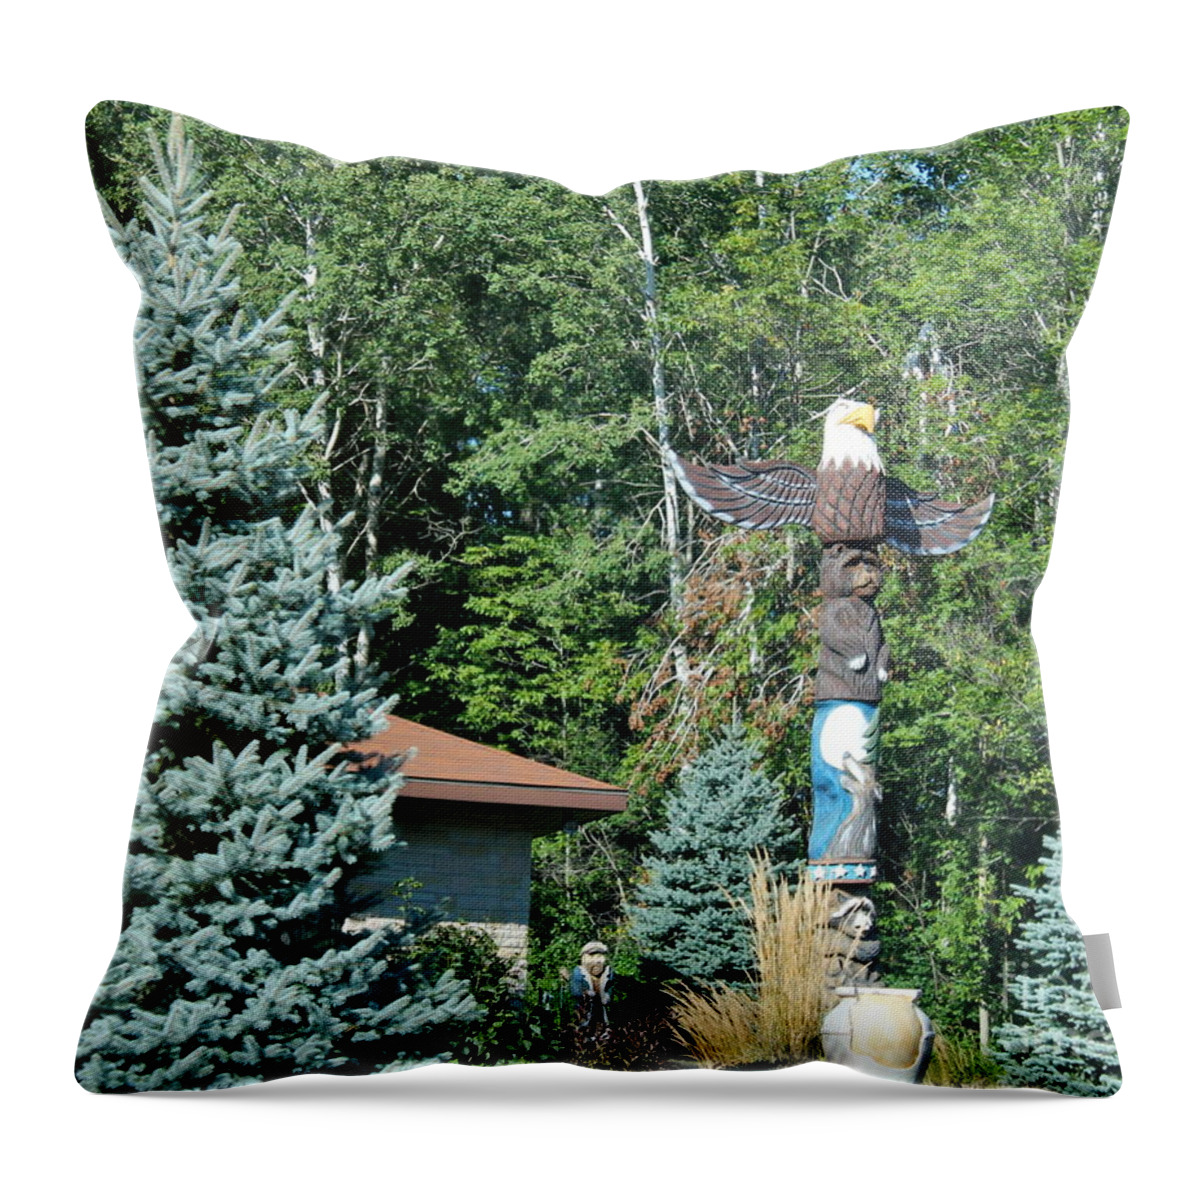 Totem Pole Throw Pillow featuring the photograph Yard Totem by Pamela Walrath